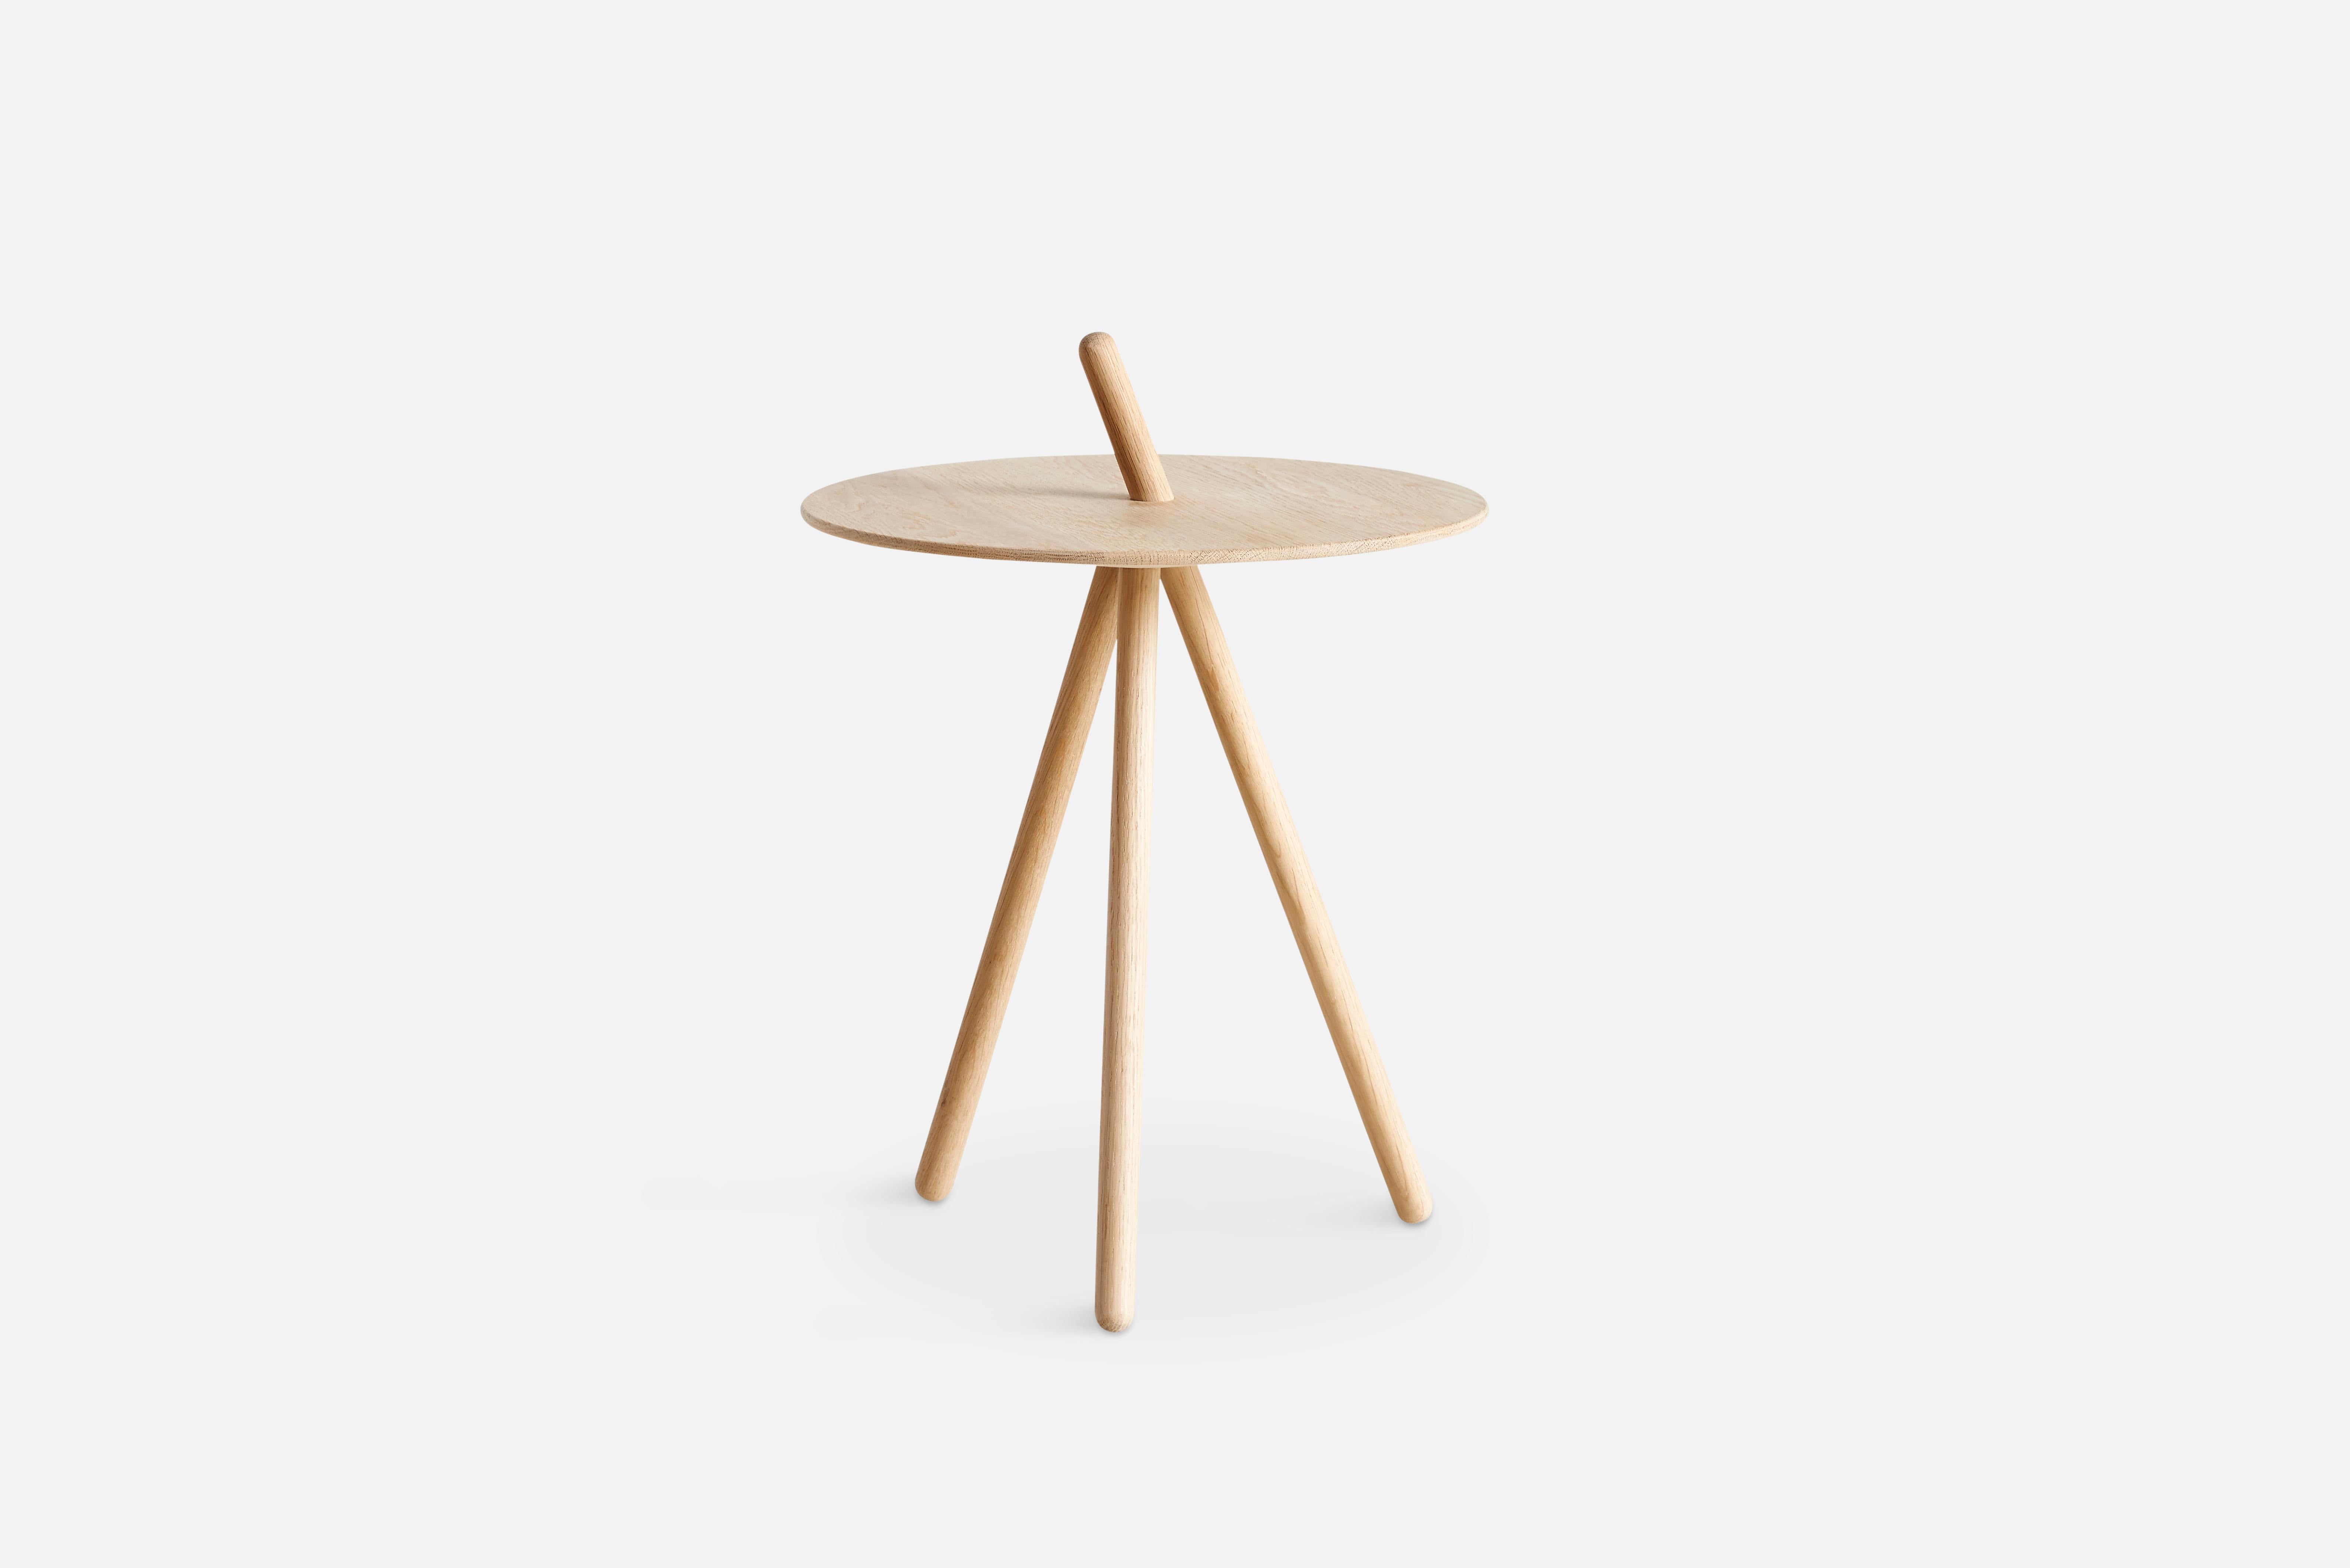 White oak come here side table by Steffen Juul
Materials: Oak
Dimensions: D 41 x W 41 x H 45 cm.

The founders, Mia and Torben Koed, decided to put their 30 years of experience into a new project. It was time for a change and a new challenge.